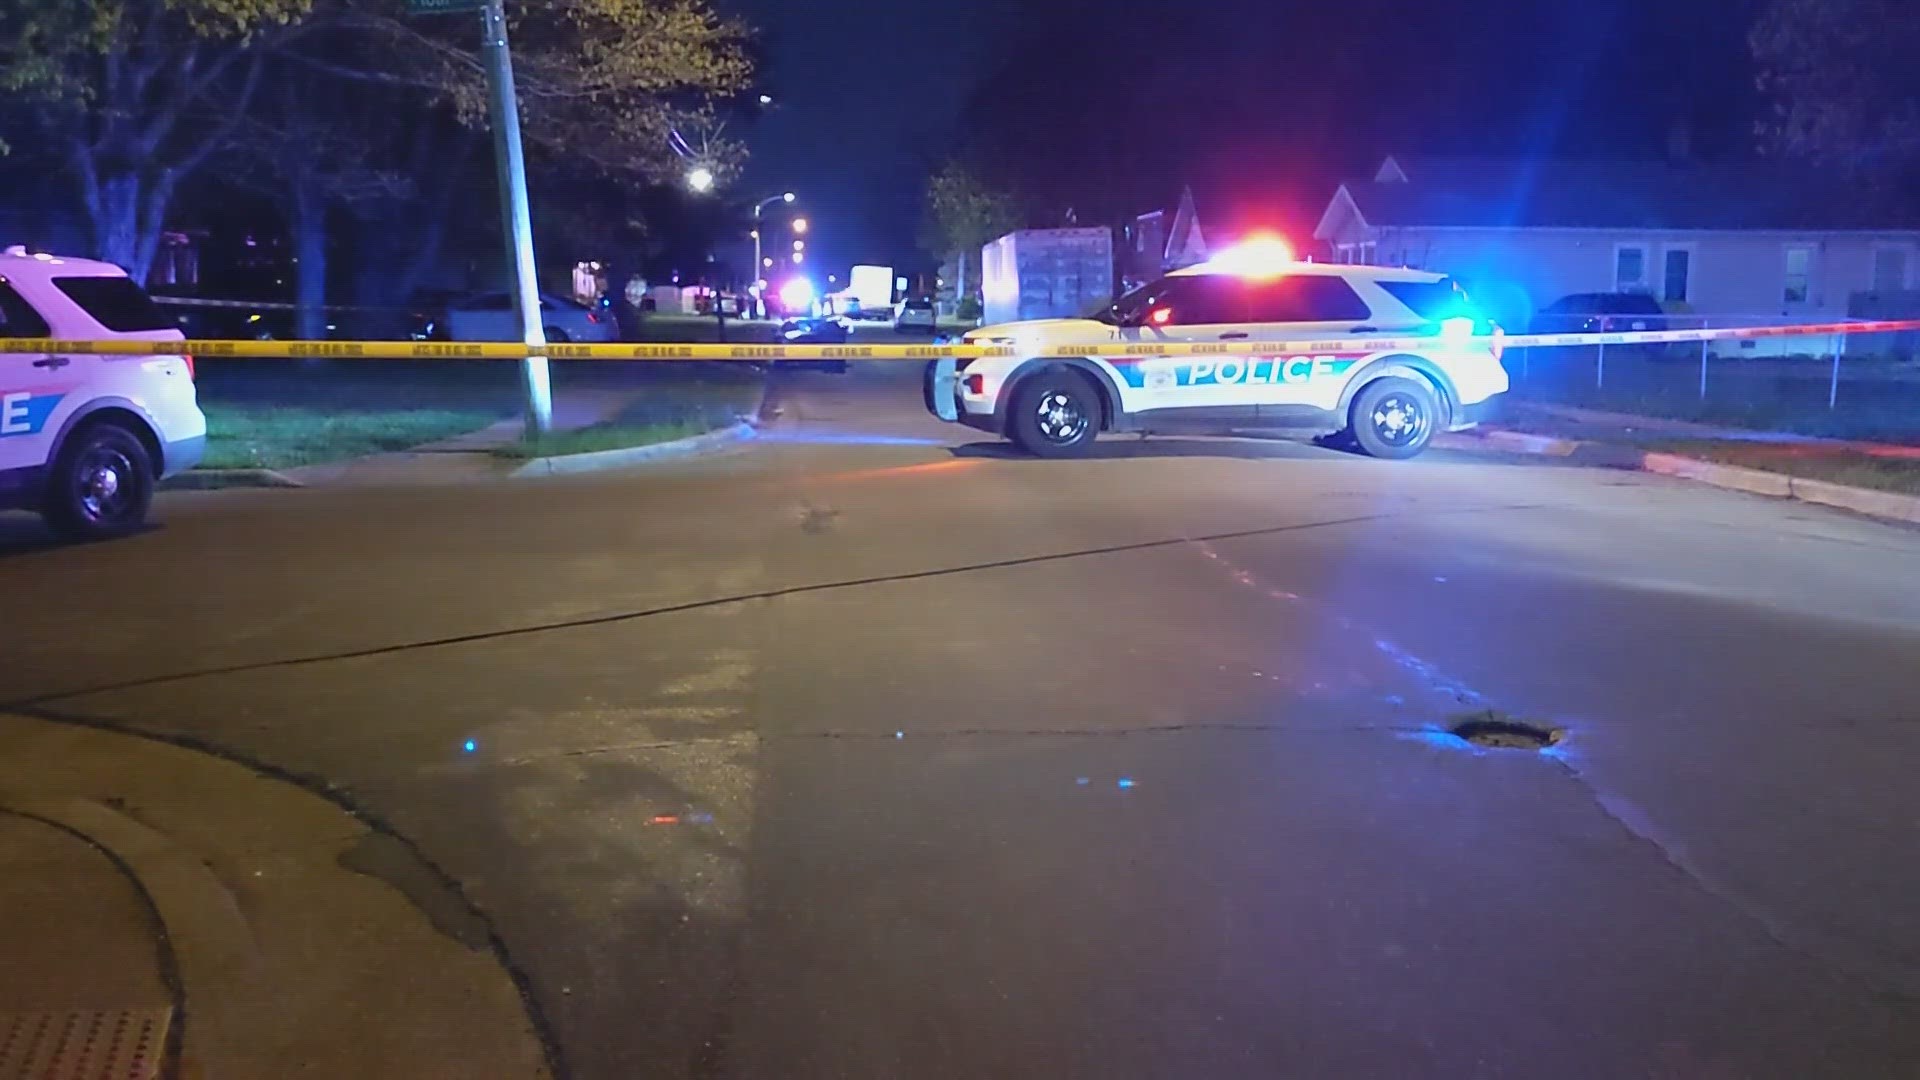 Homicides are up 54% compared to this time last year in Columbus.